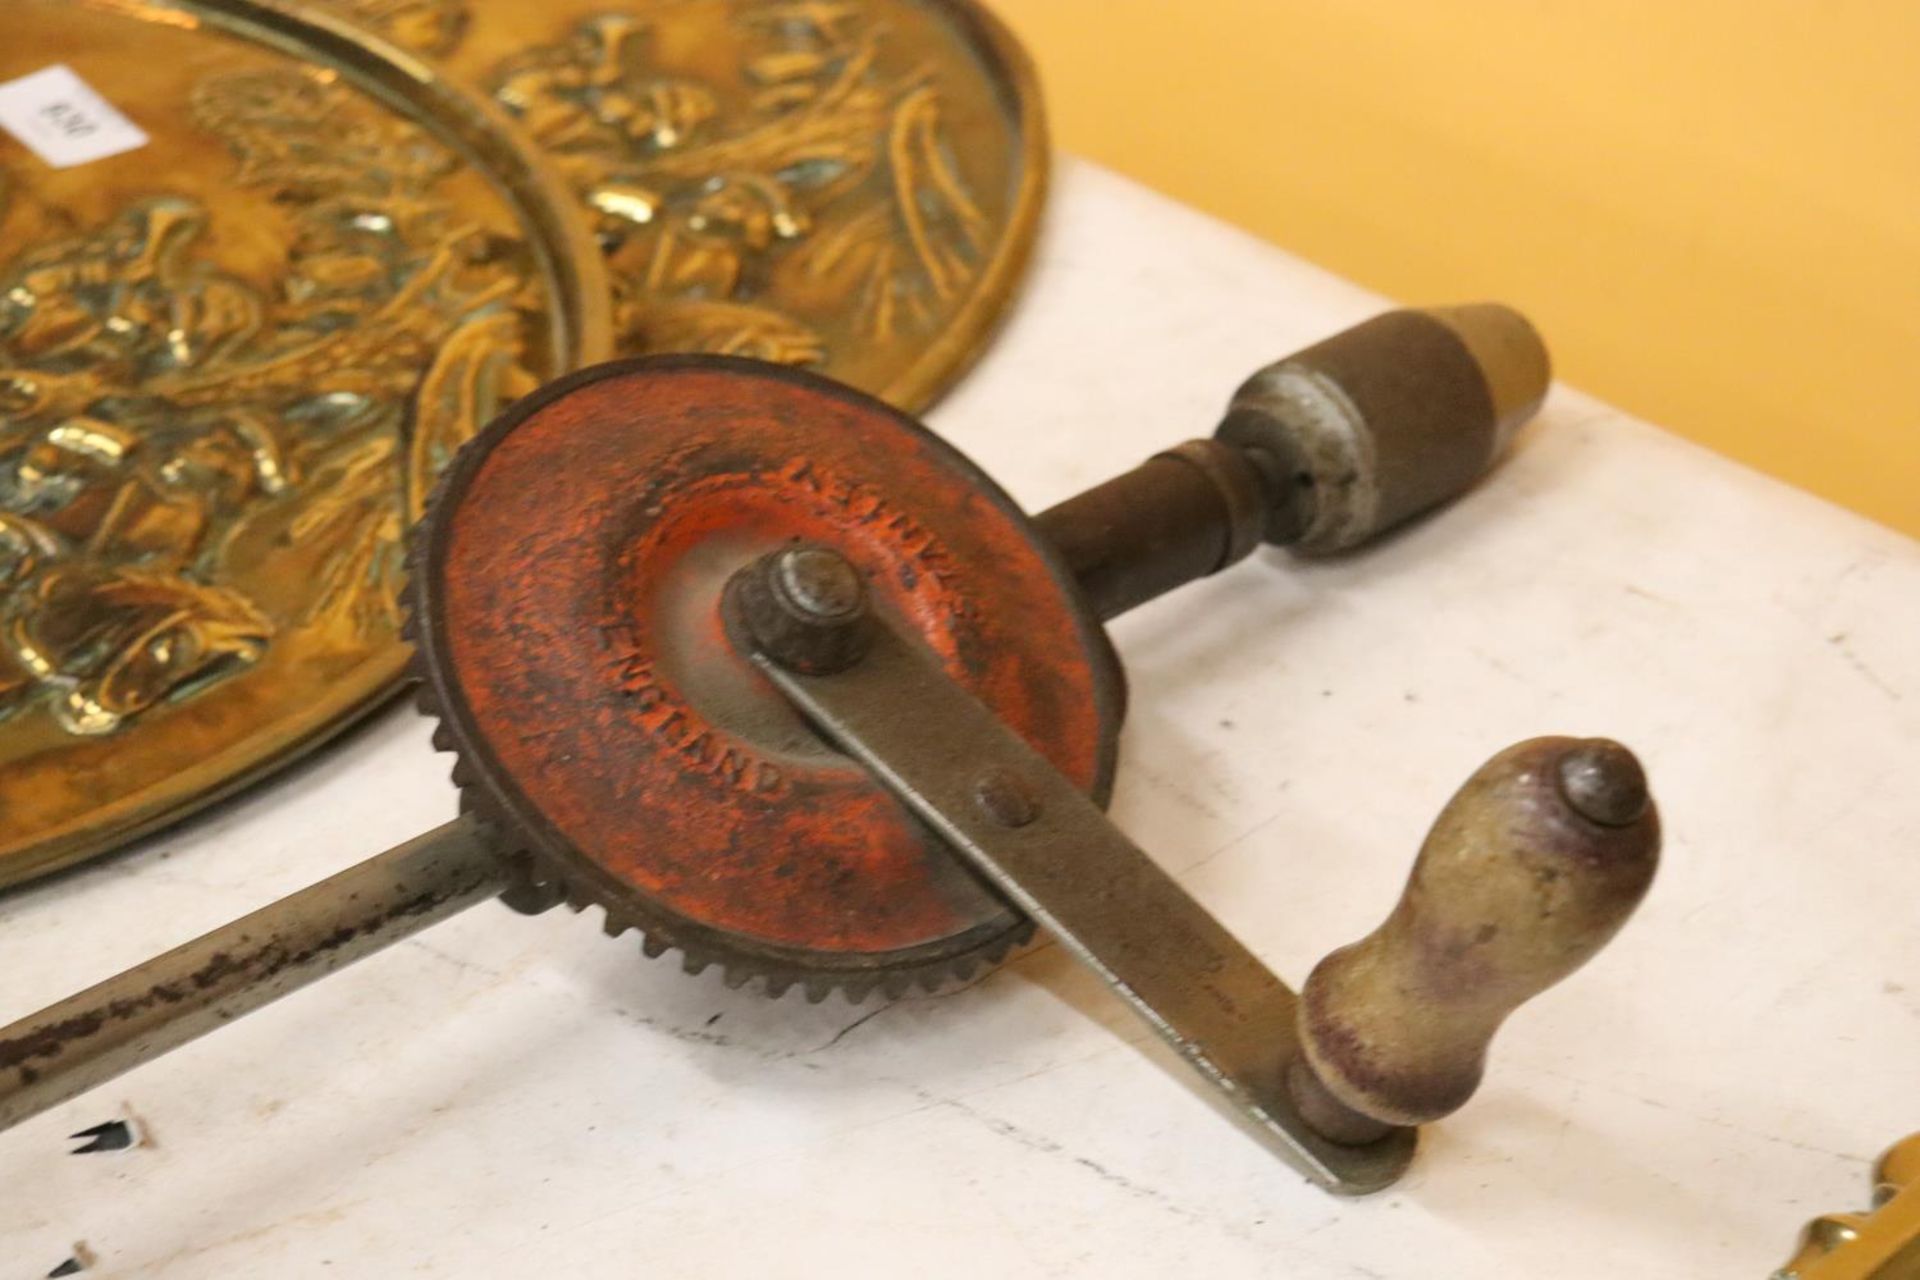 A VINTAGE STANLEY HAND DRILL - Image 4 of 4